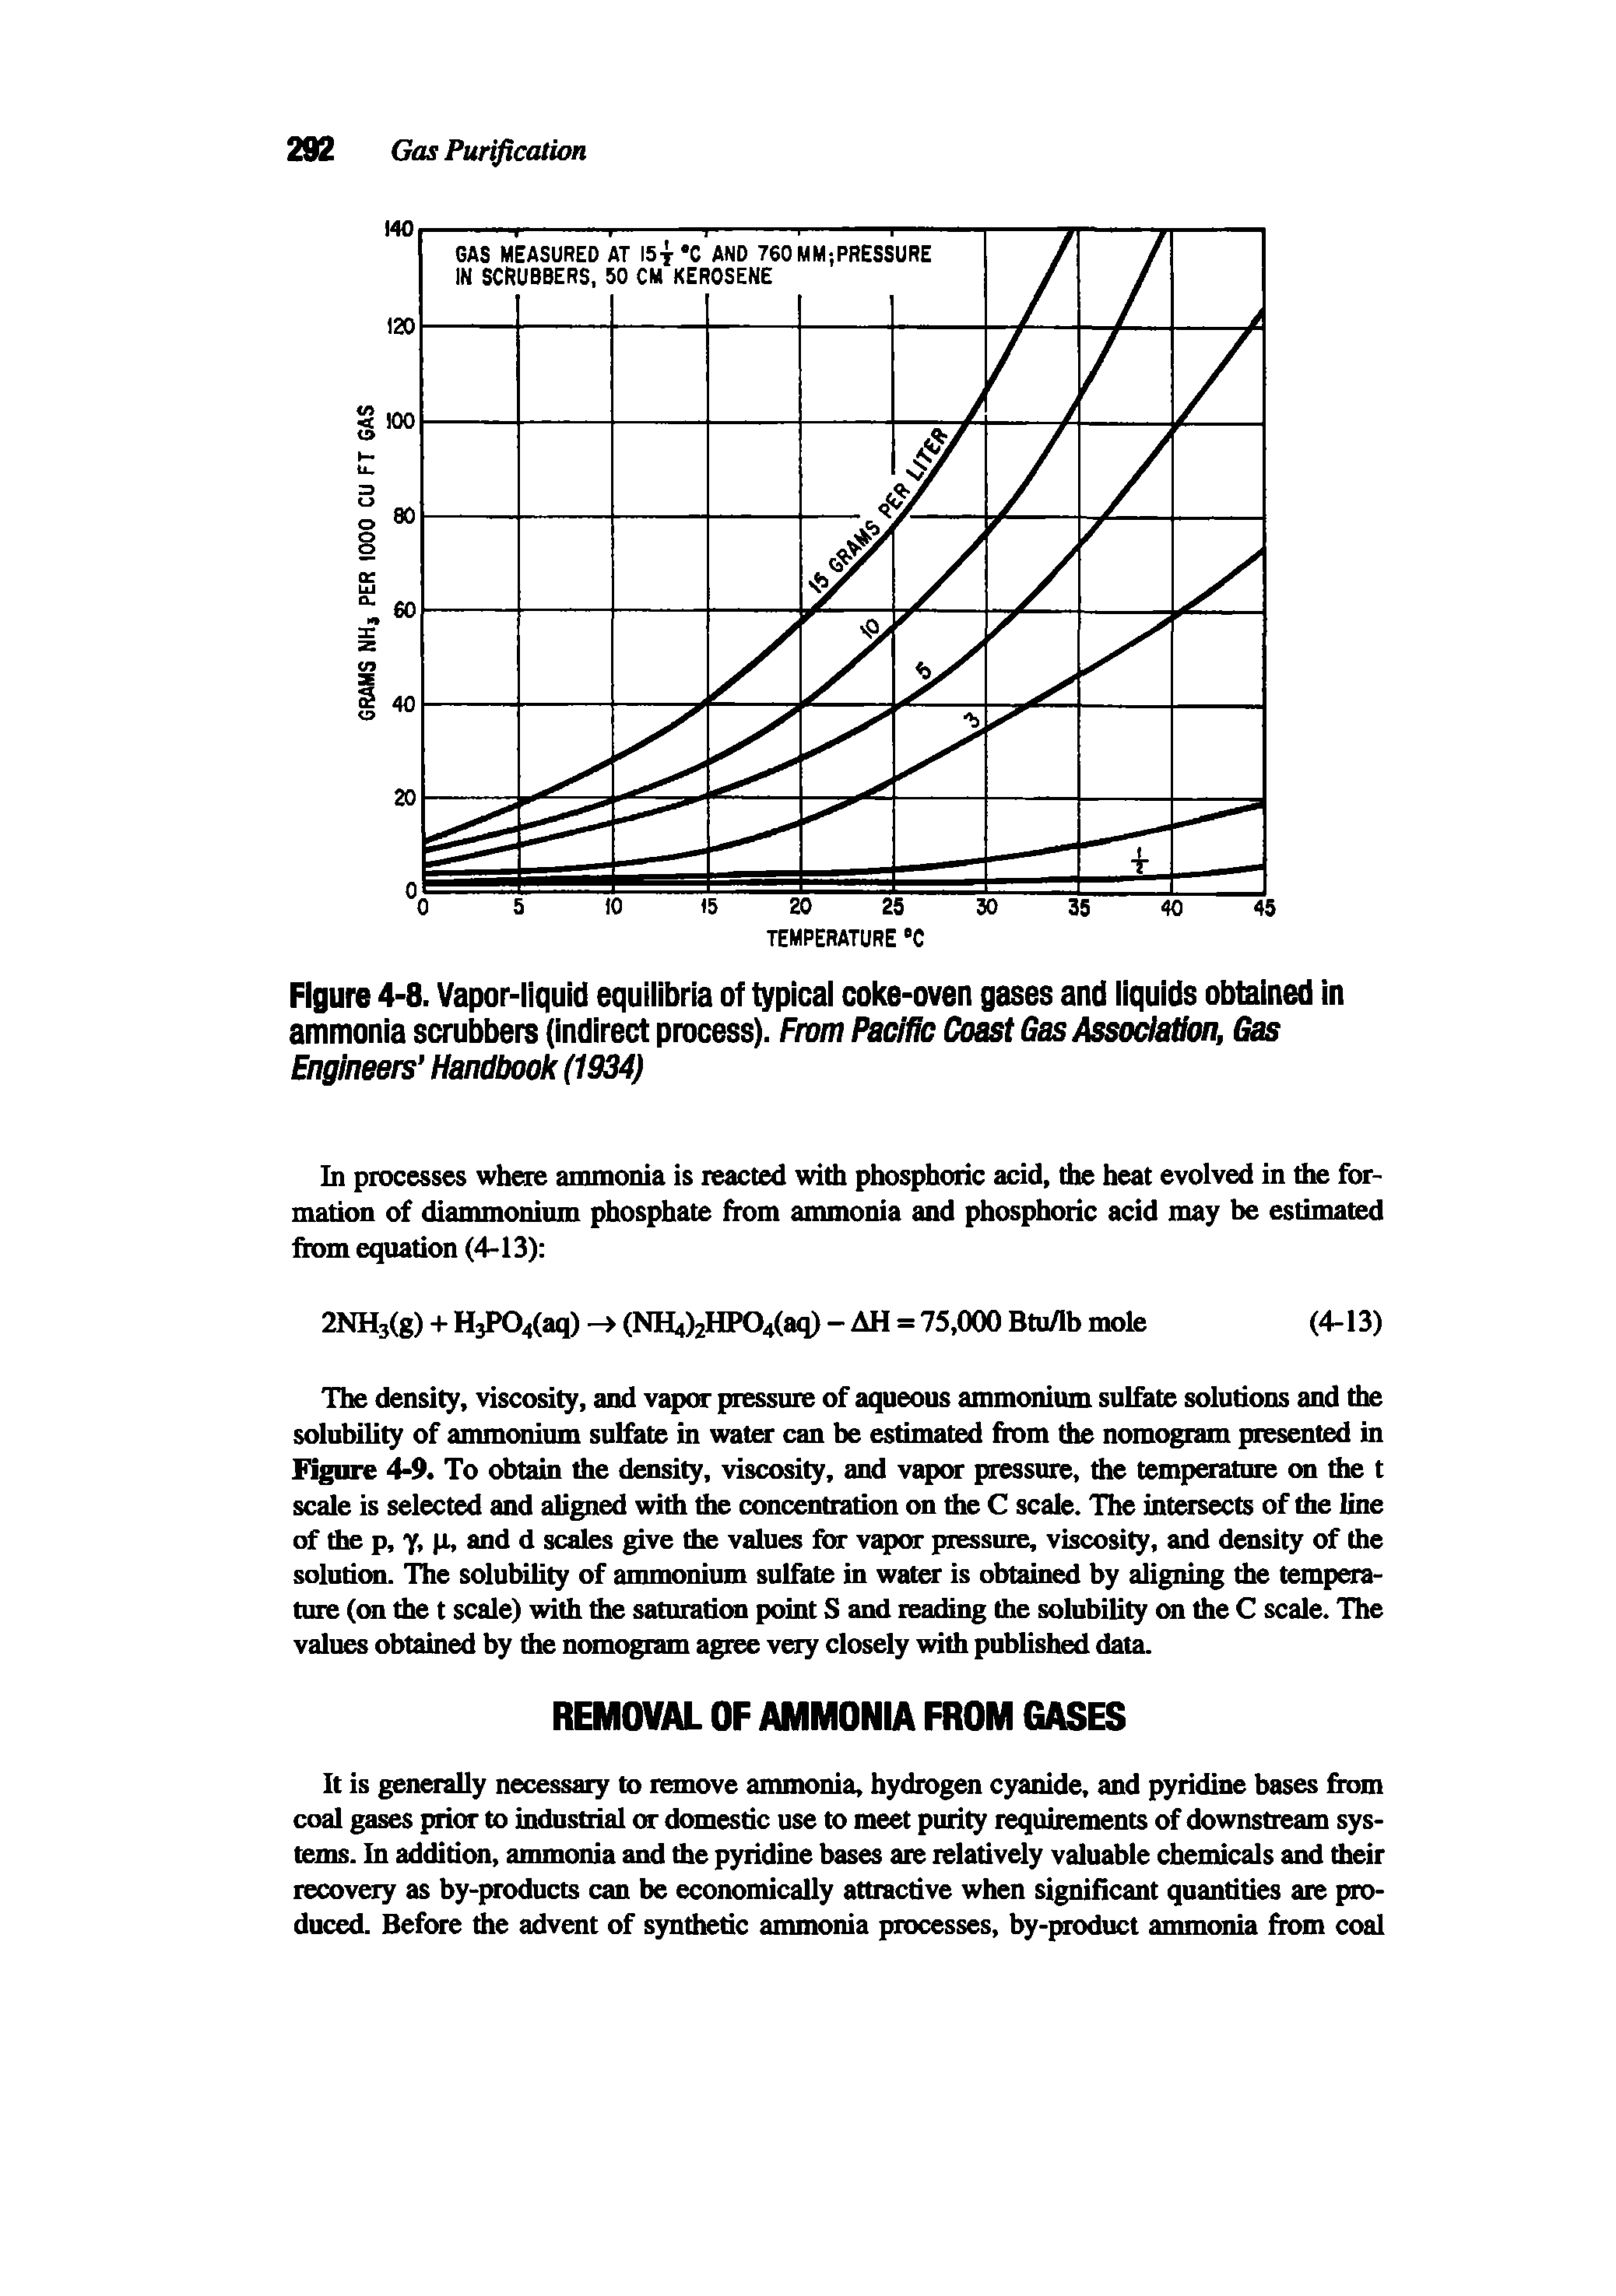 Figure 4-8. Vapor-liquid equilibria of typical coke-oven gases and liquids obtained in ammonia scrubbers (indirect process). From Pacific Coast Gas Association, Gas Engineers Handbook (1934)...